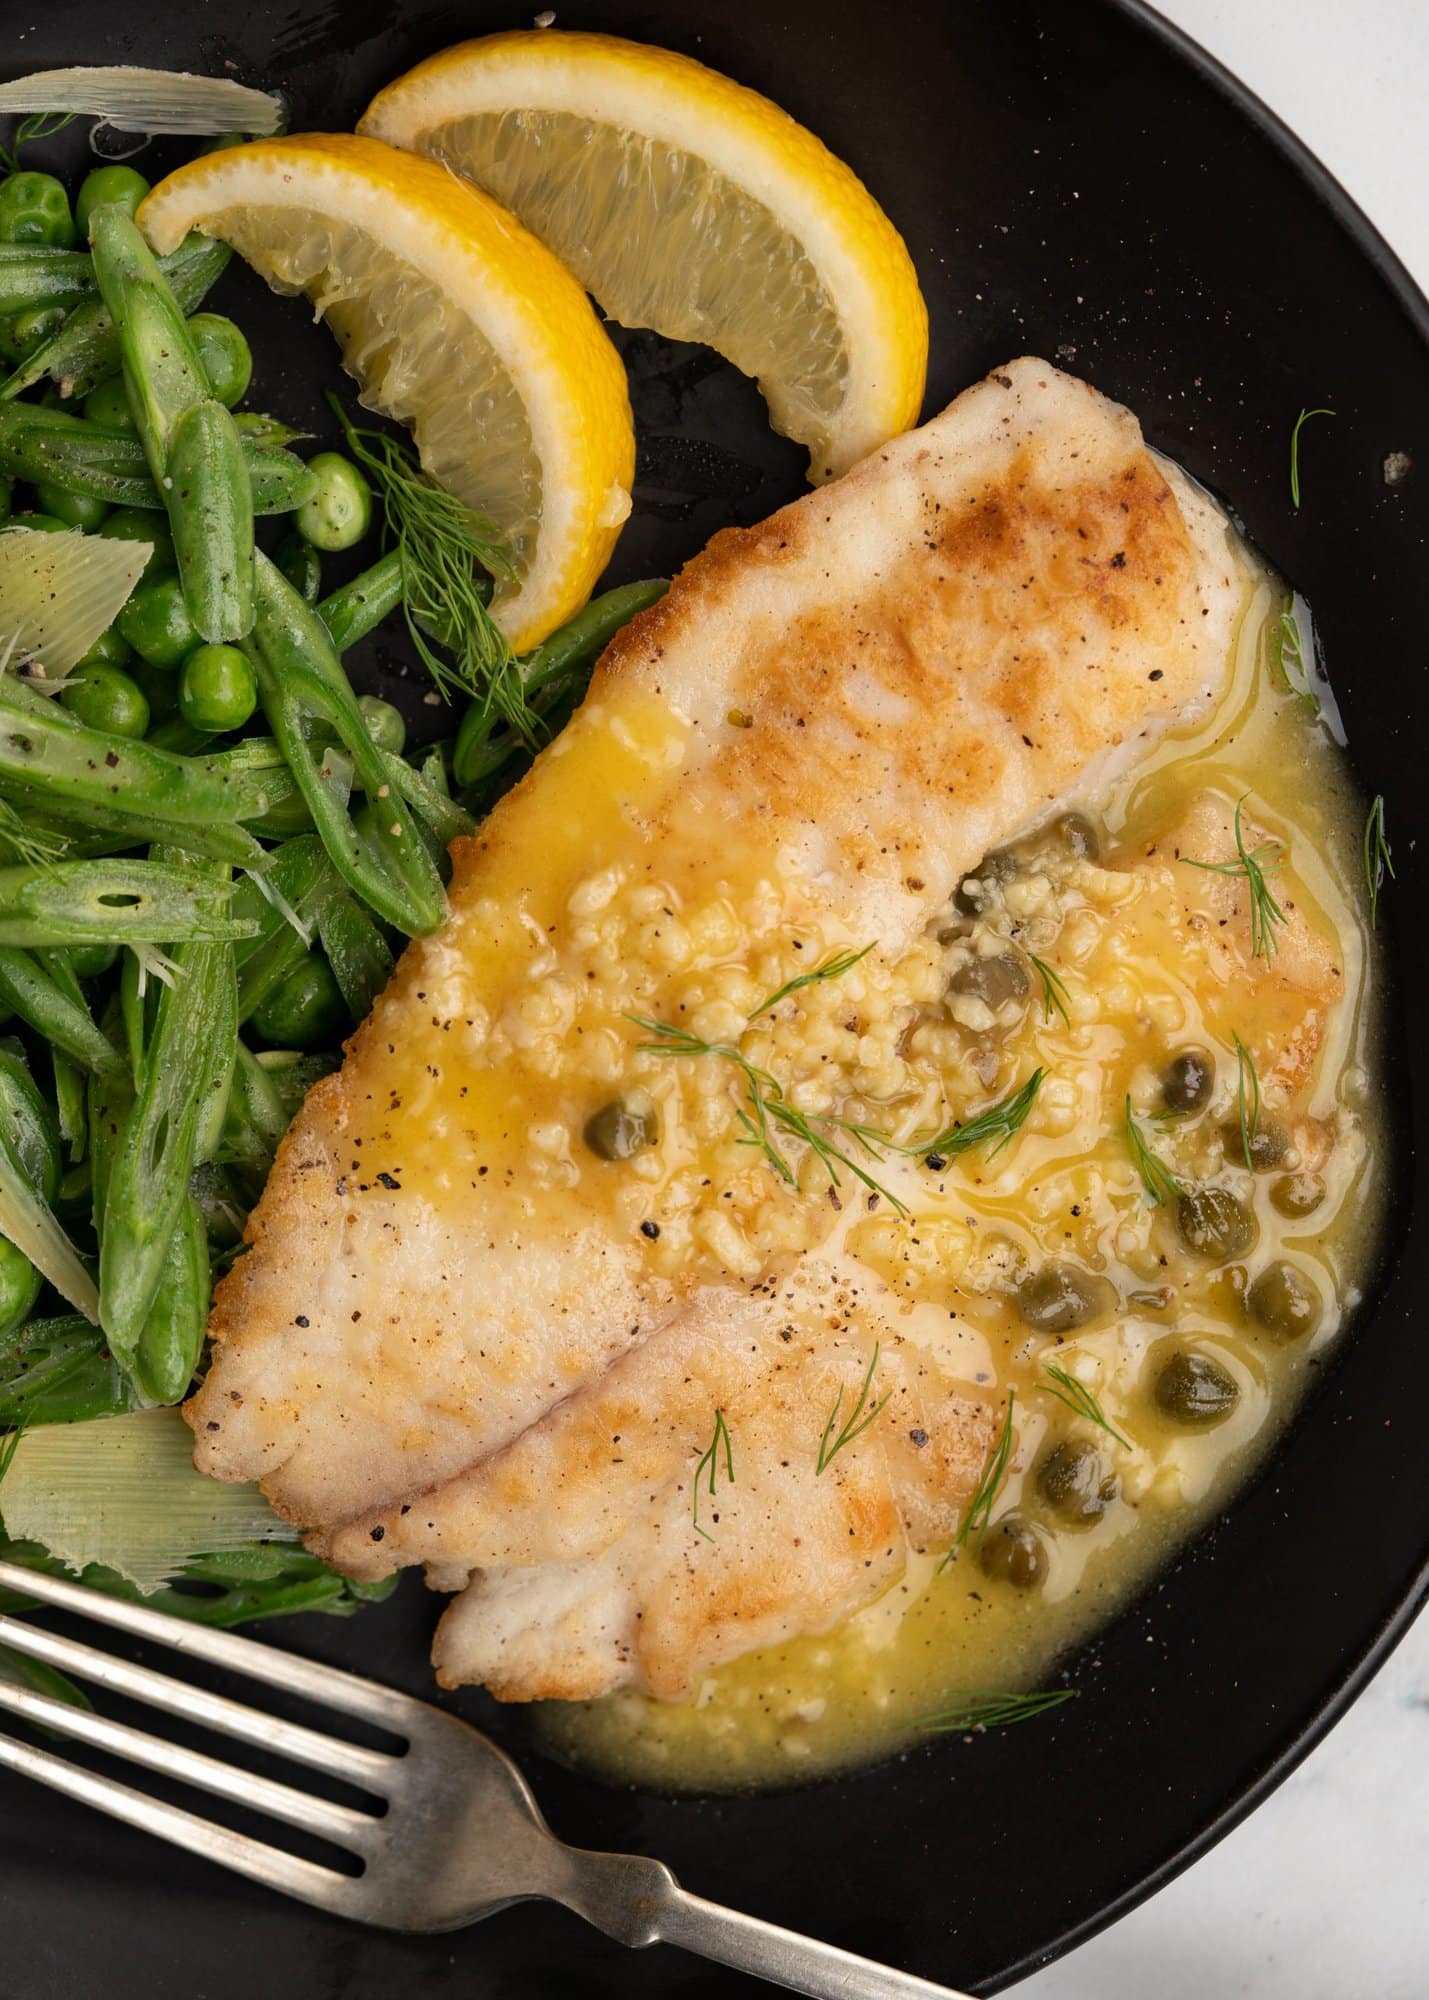 Crispy Pan-fried Tilapia is served with a decadent Lemon Caper sauce. This Tilapia recipe has a bright fresh flavor and just hits the spot. You need less than 20 minutes to make this restaurant-worthy meal at home. 
